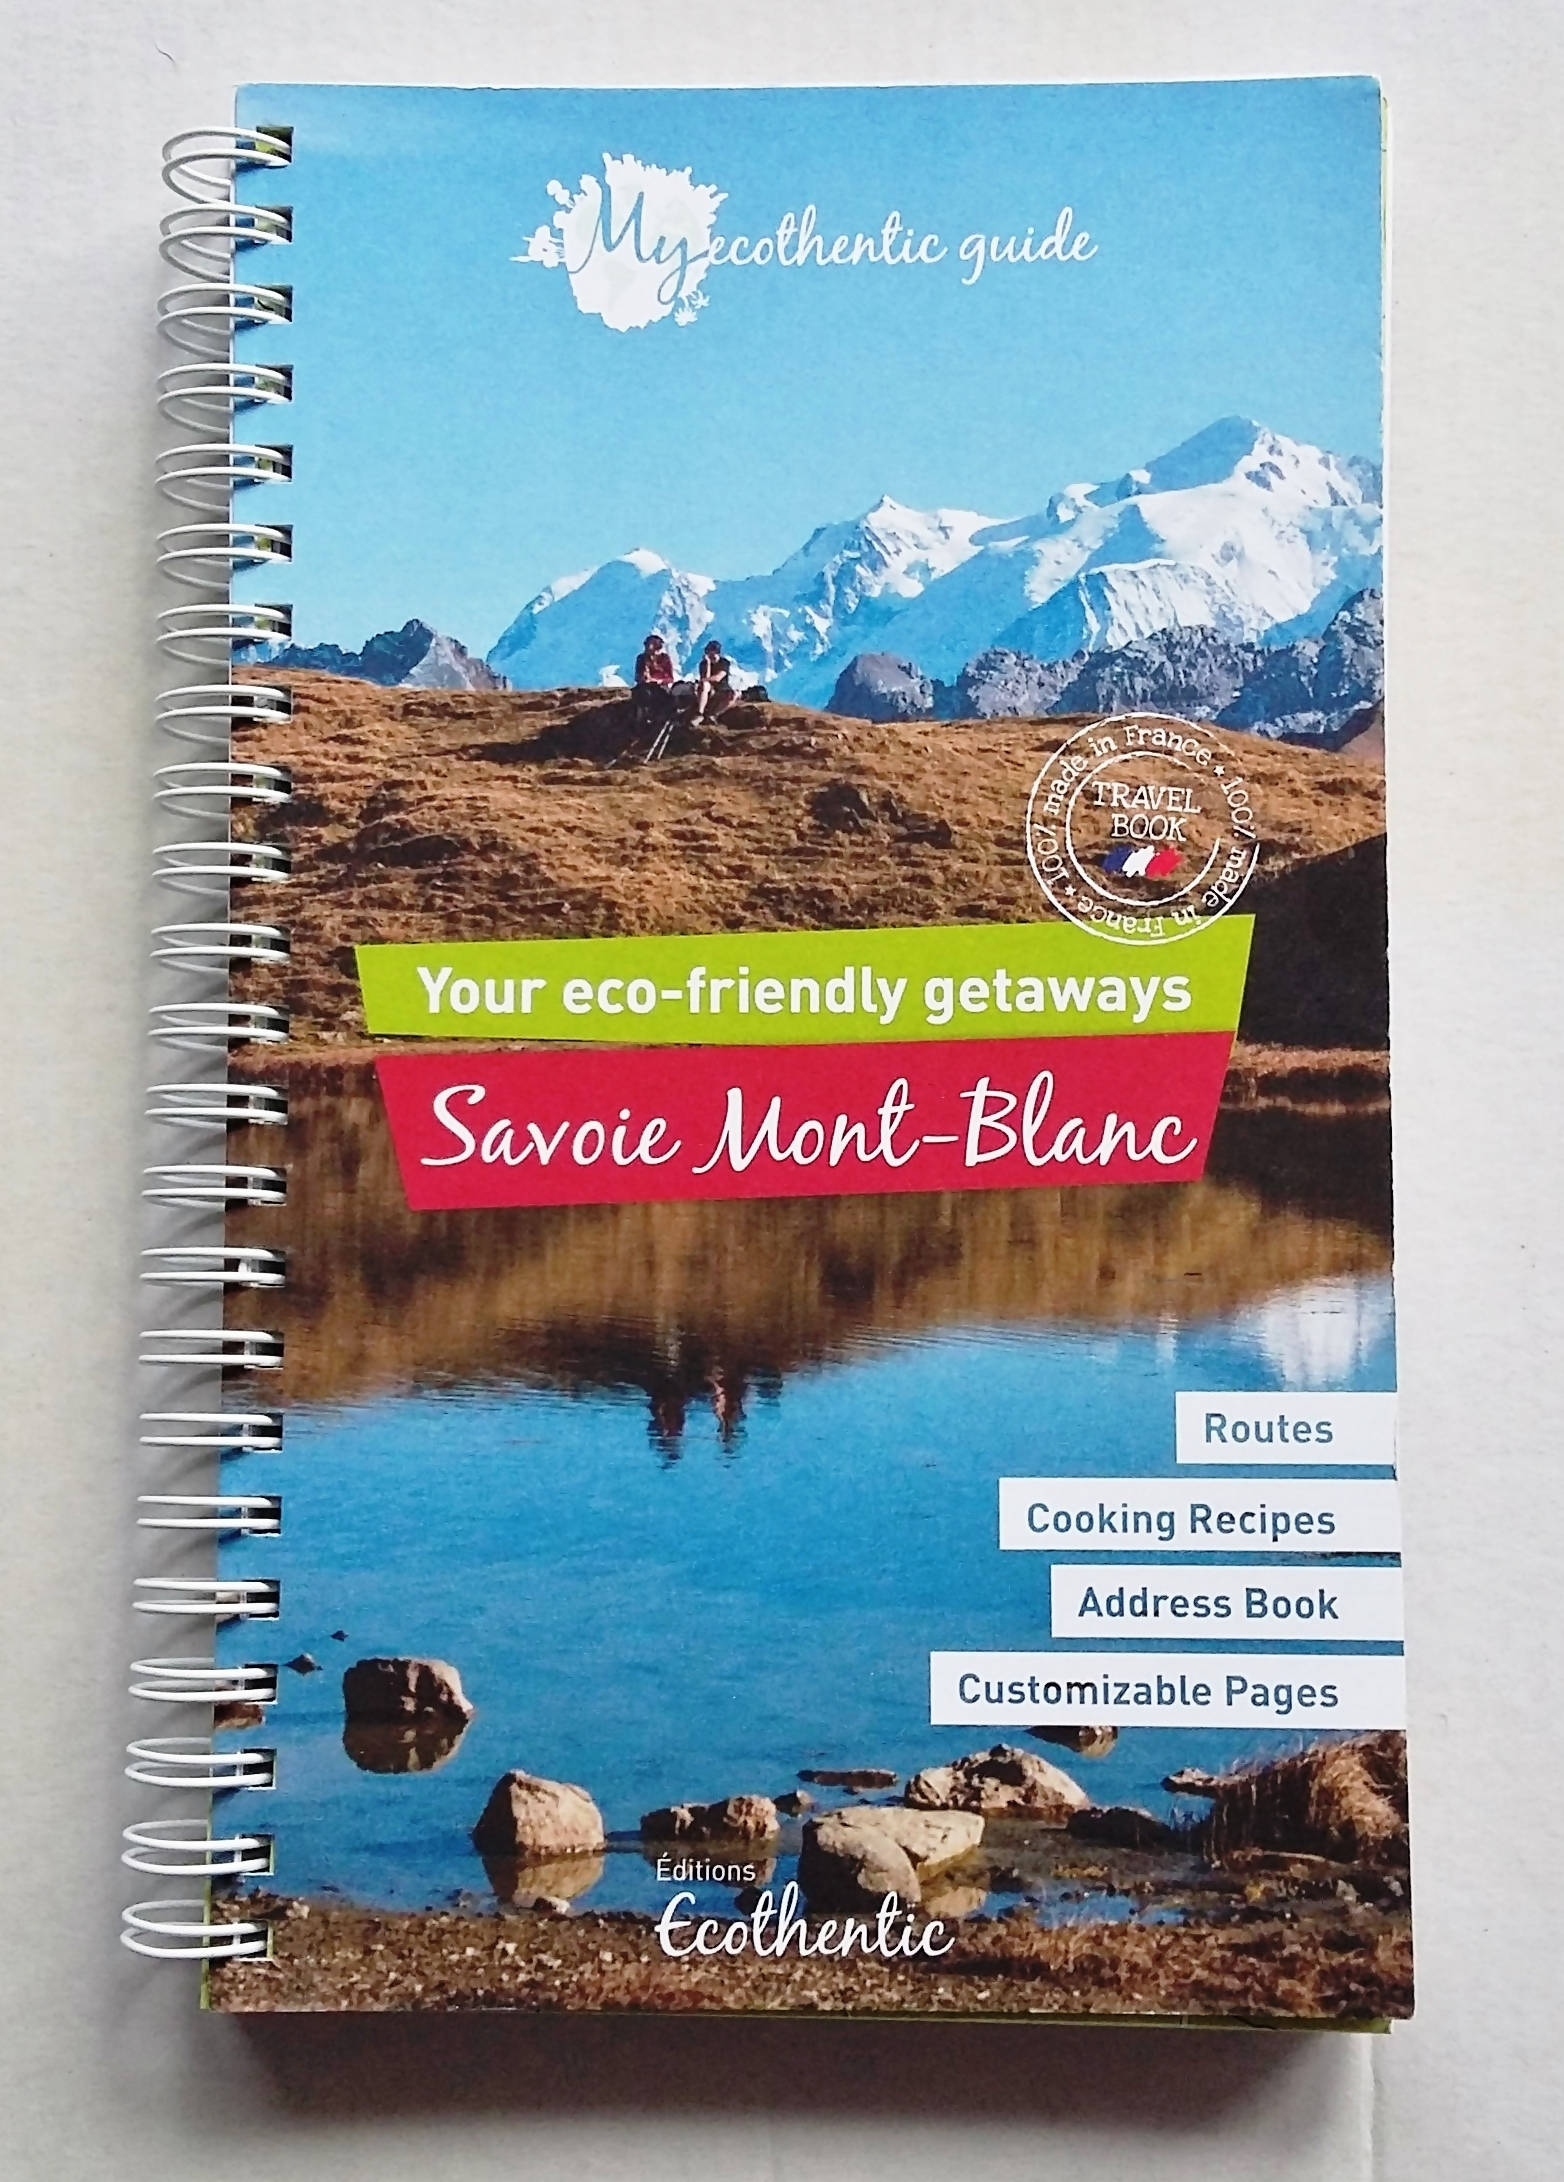 My ecothentic guide Savoie Mont-Blanc (english)